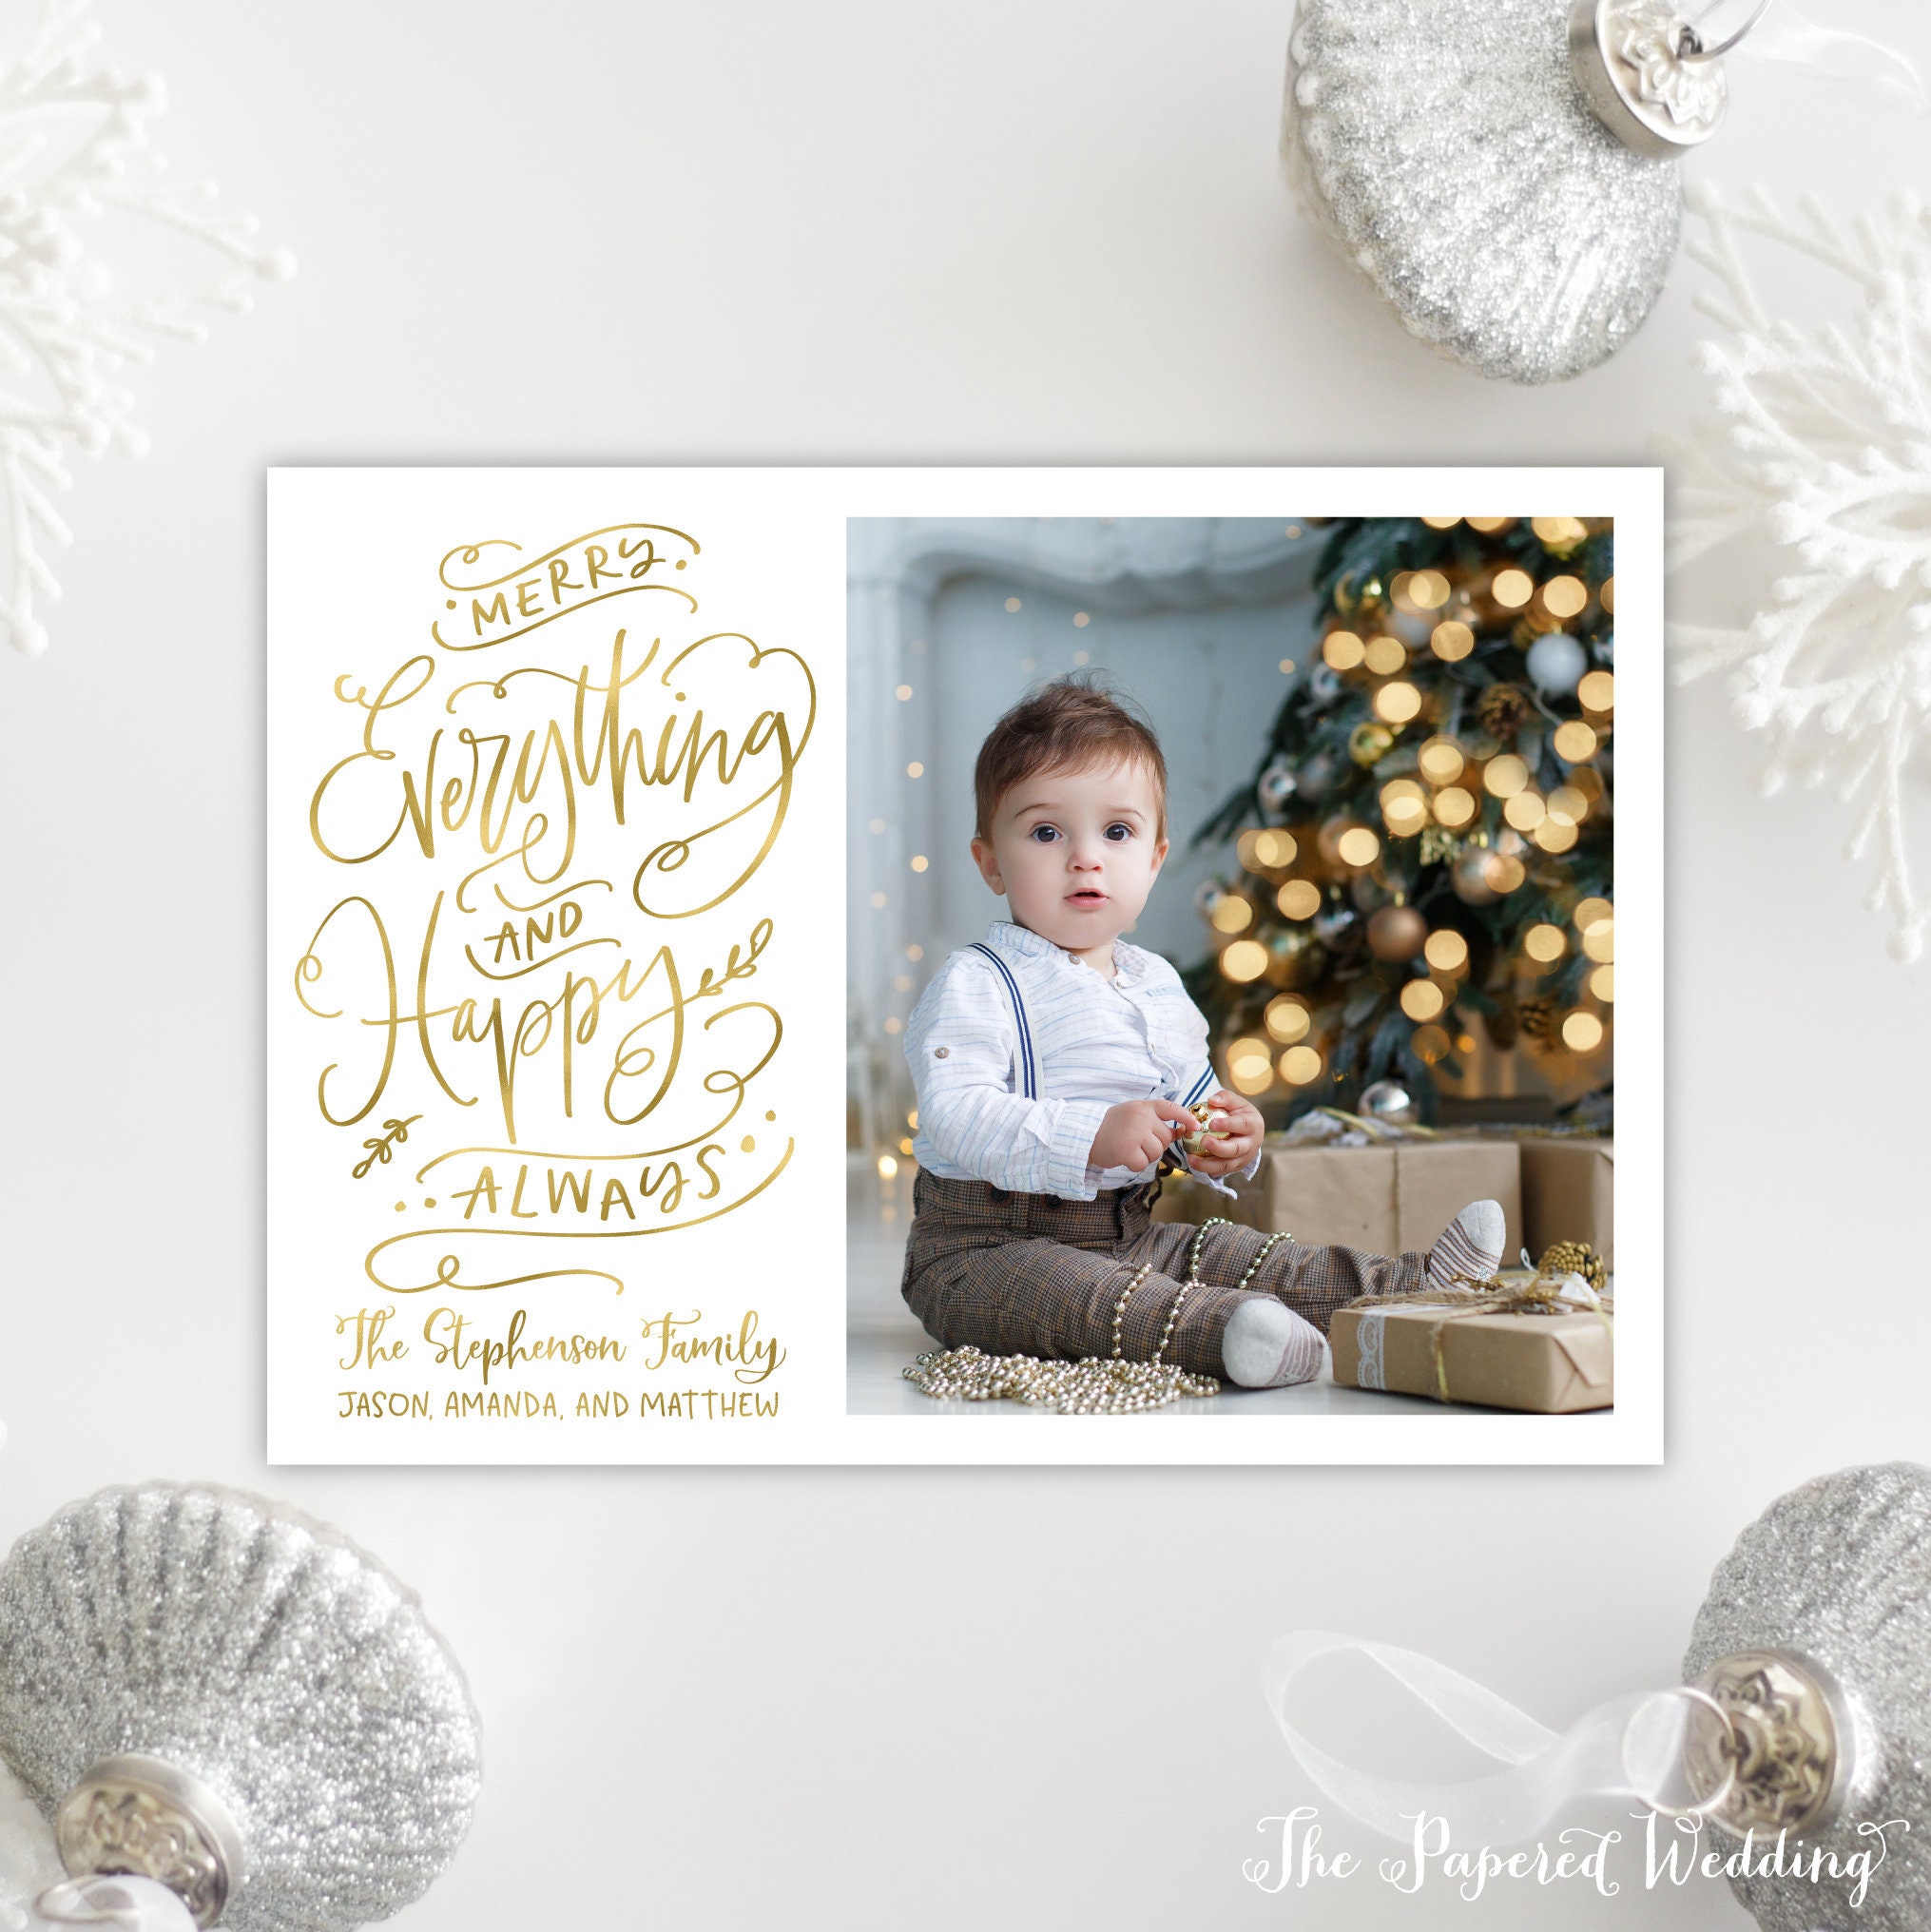 Printable Or Printed Merry Everything & Happy Always Cards - Faux Gold Foil Picture Holiday Card With Non-Religious Wording, Modern 072 P1